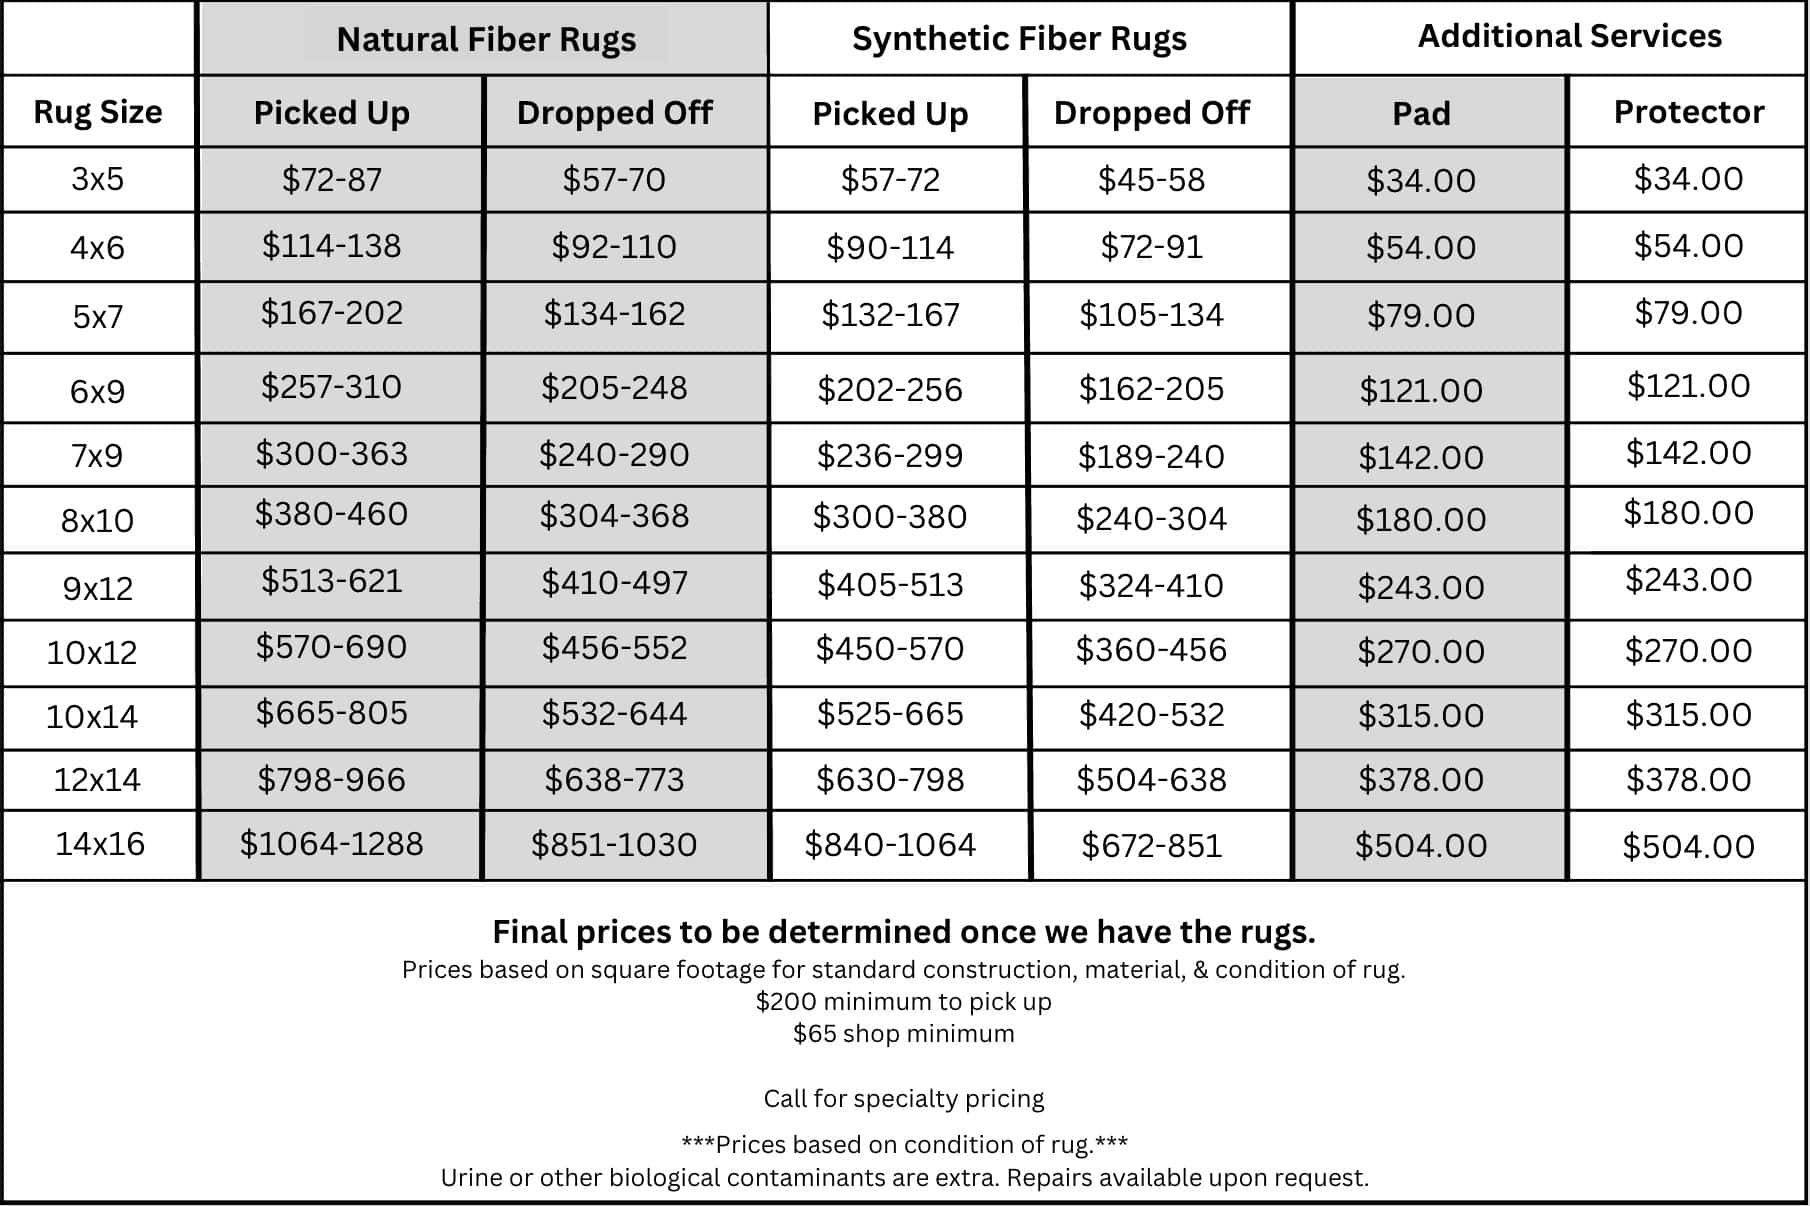 Synthetic Fiber Rugs